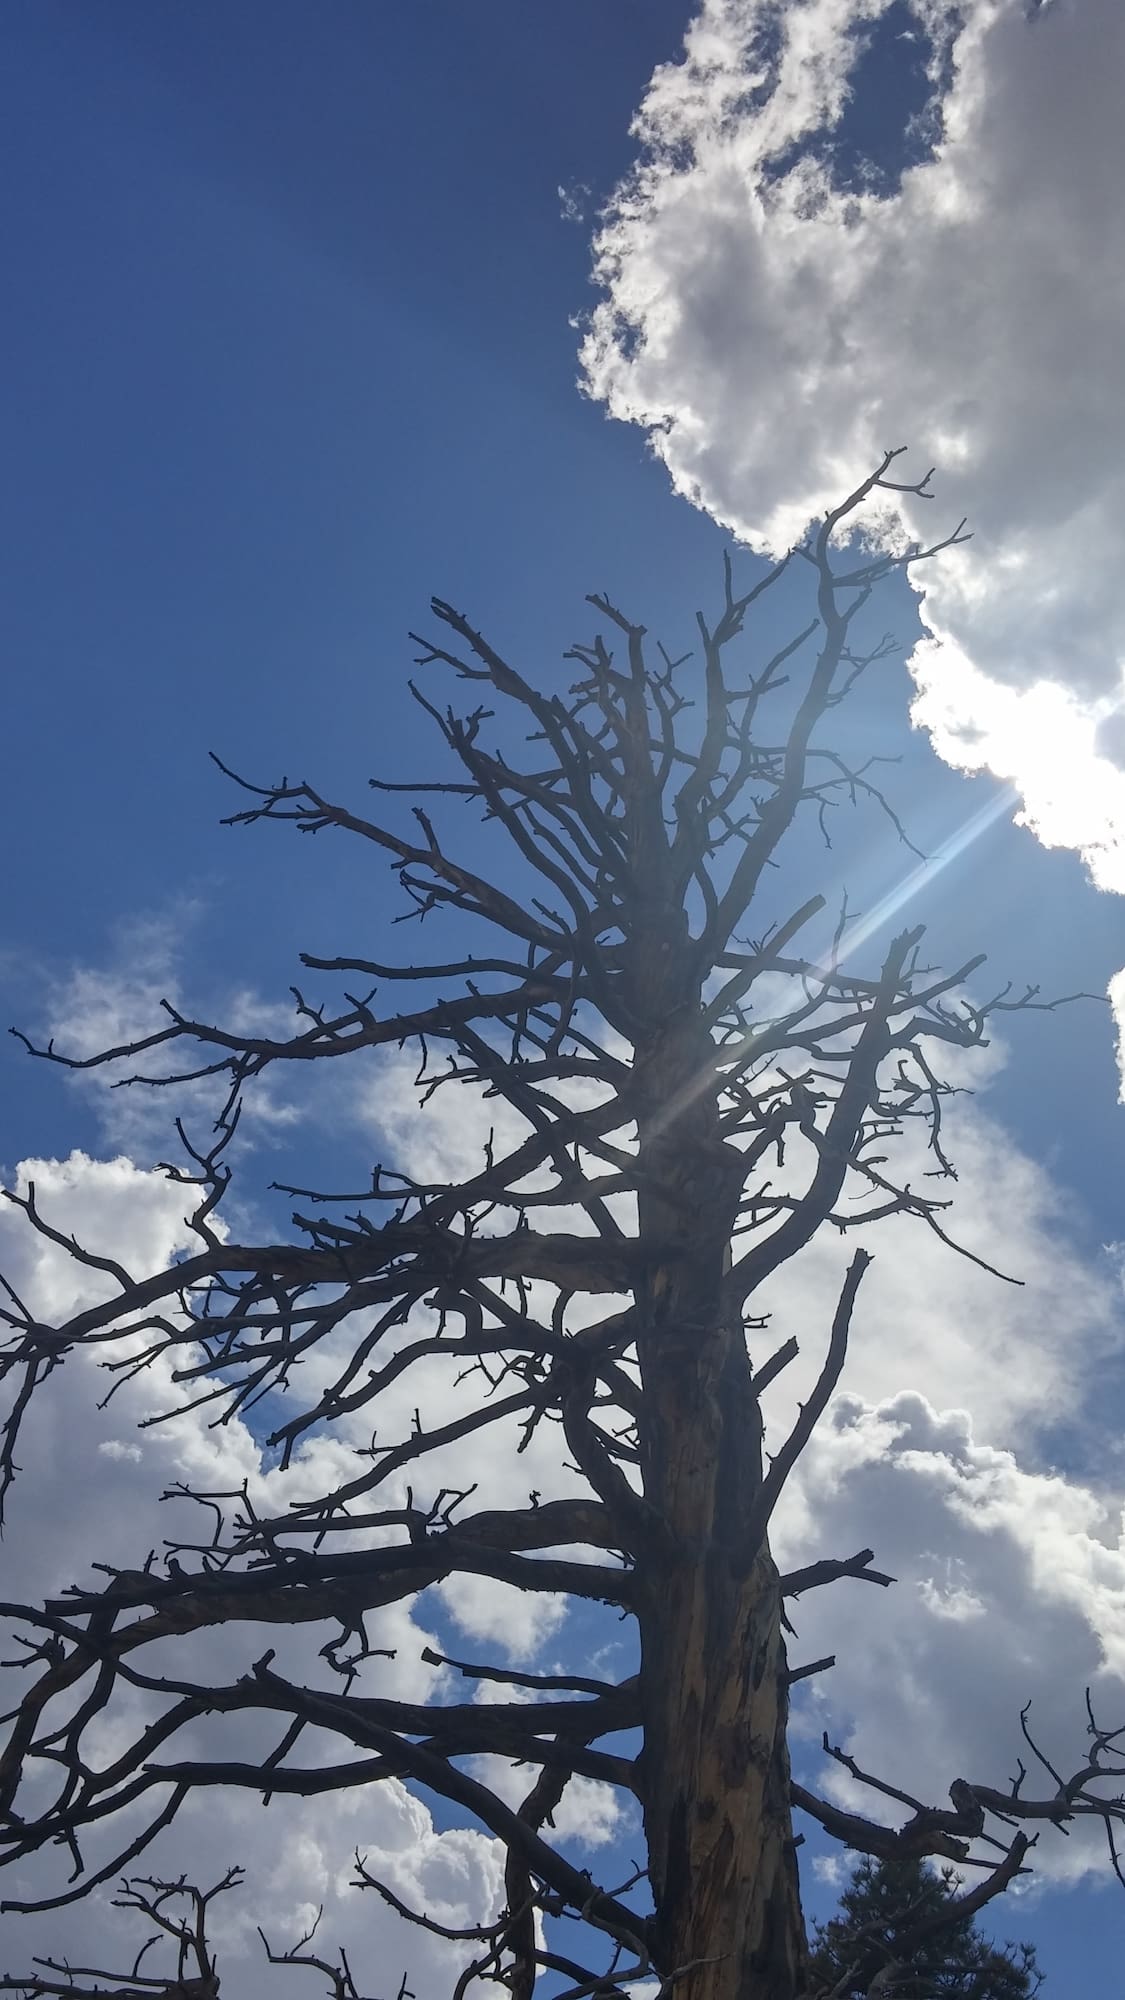 SUU Past: Reaching by SUU Alumnus Amy Toronto Weir "This old Cedar tree, found along one of the trails, was always reaching for the sun, just as my education helped me reach for higher things." 11